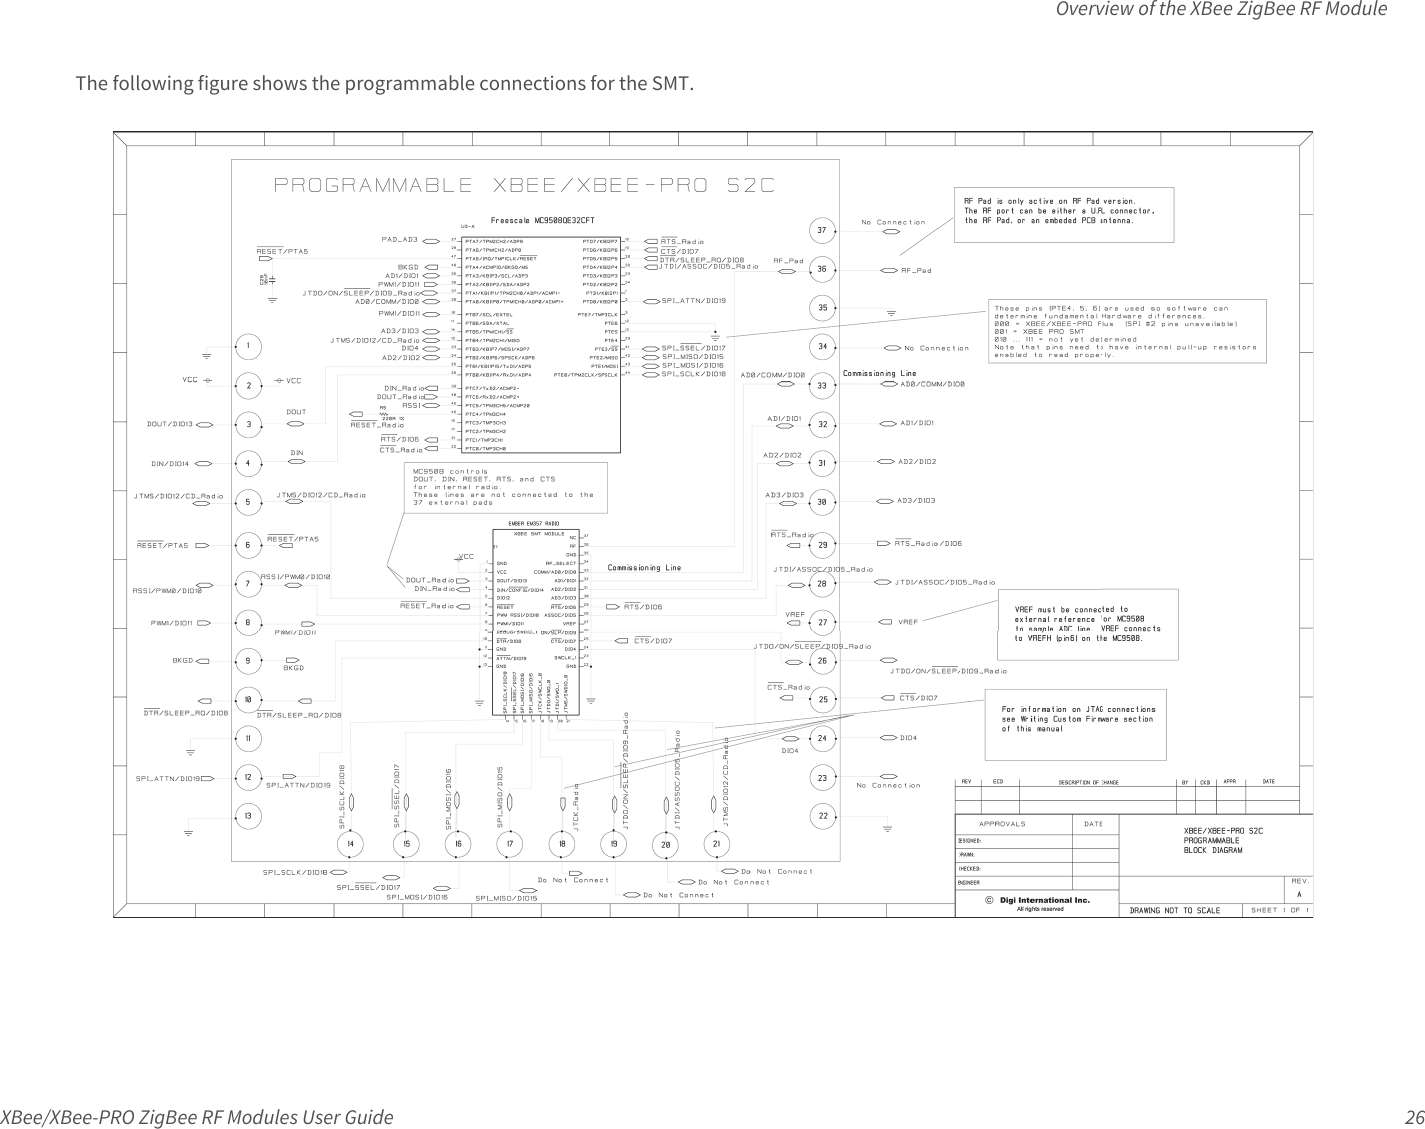 Overview of the XBee ZigBee RF ModuleXBee/XBee-PRO ZigBee RF Modules User Guide 26The following figure shows the programmable connections for the SMT.